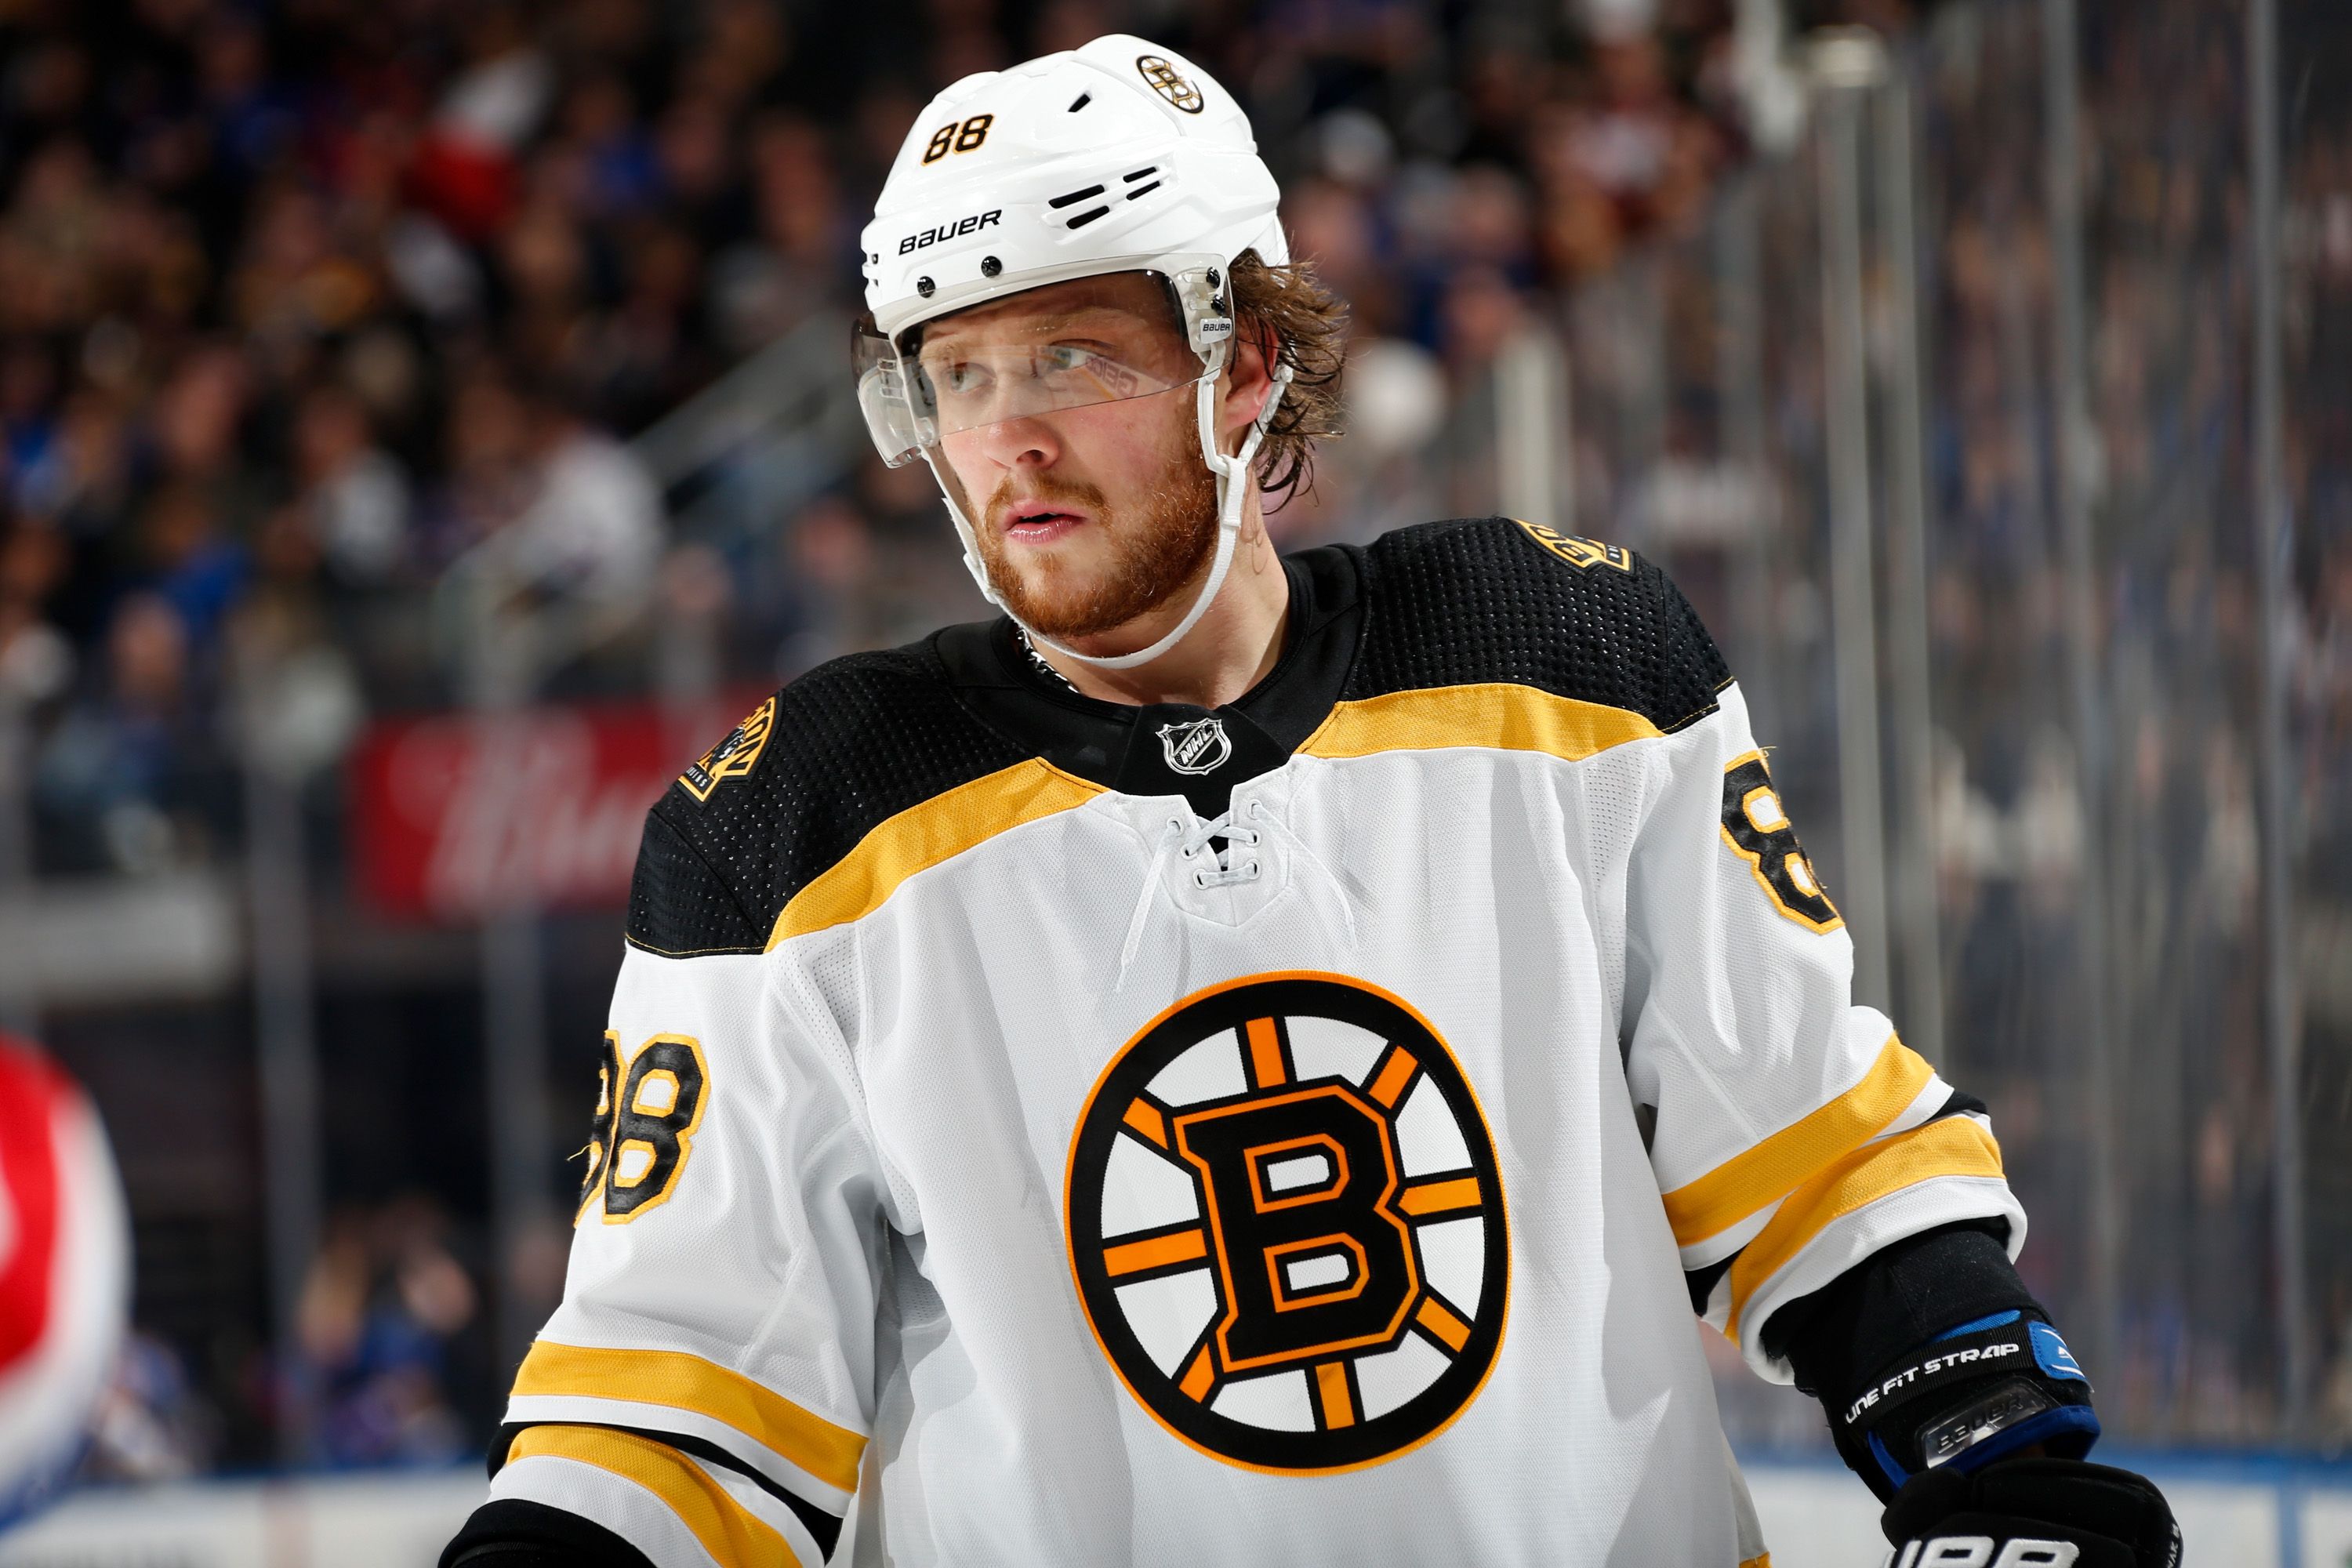 David Pastrnak at Madison Square Garden on February 16, 2020, in New York City | Photo: Jared Silber/NHLI/Getty Images